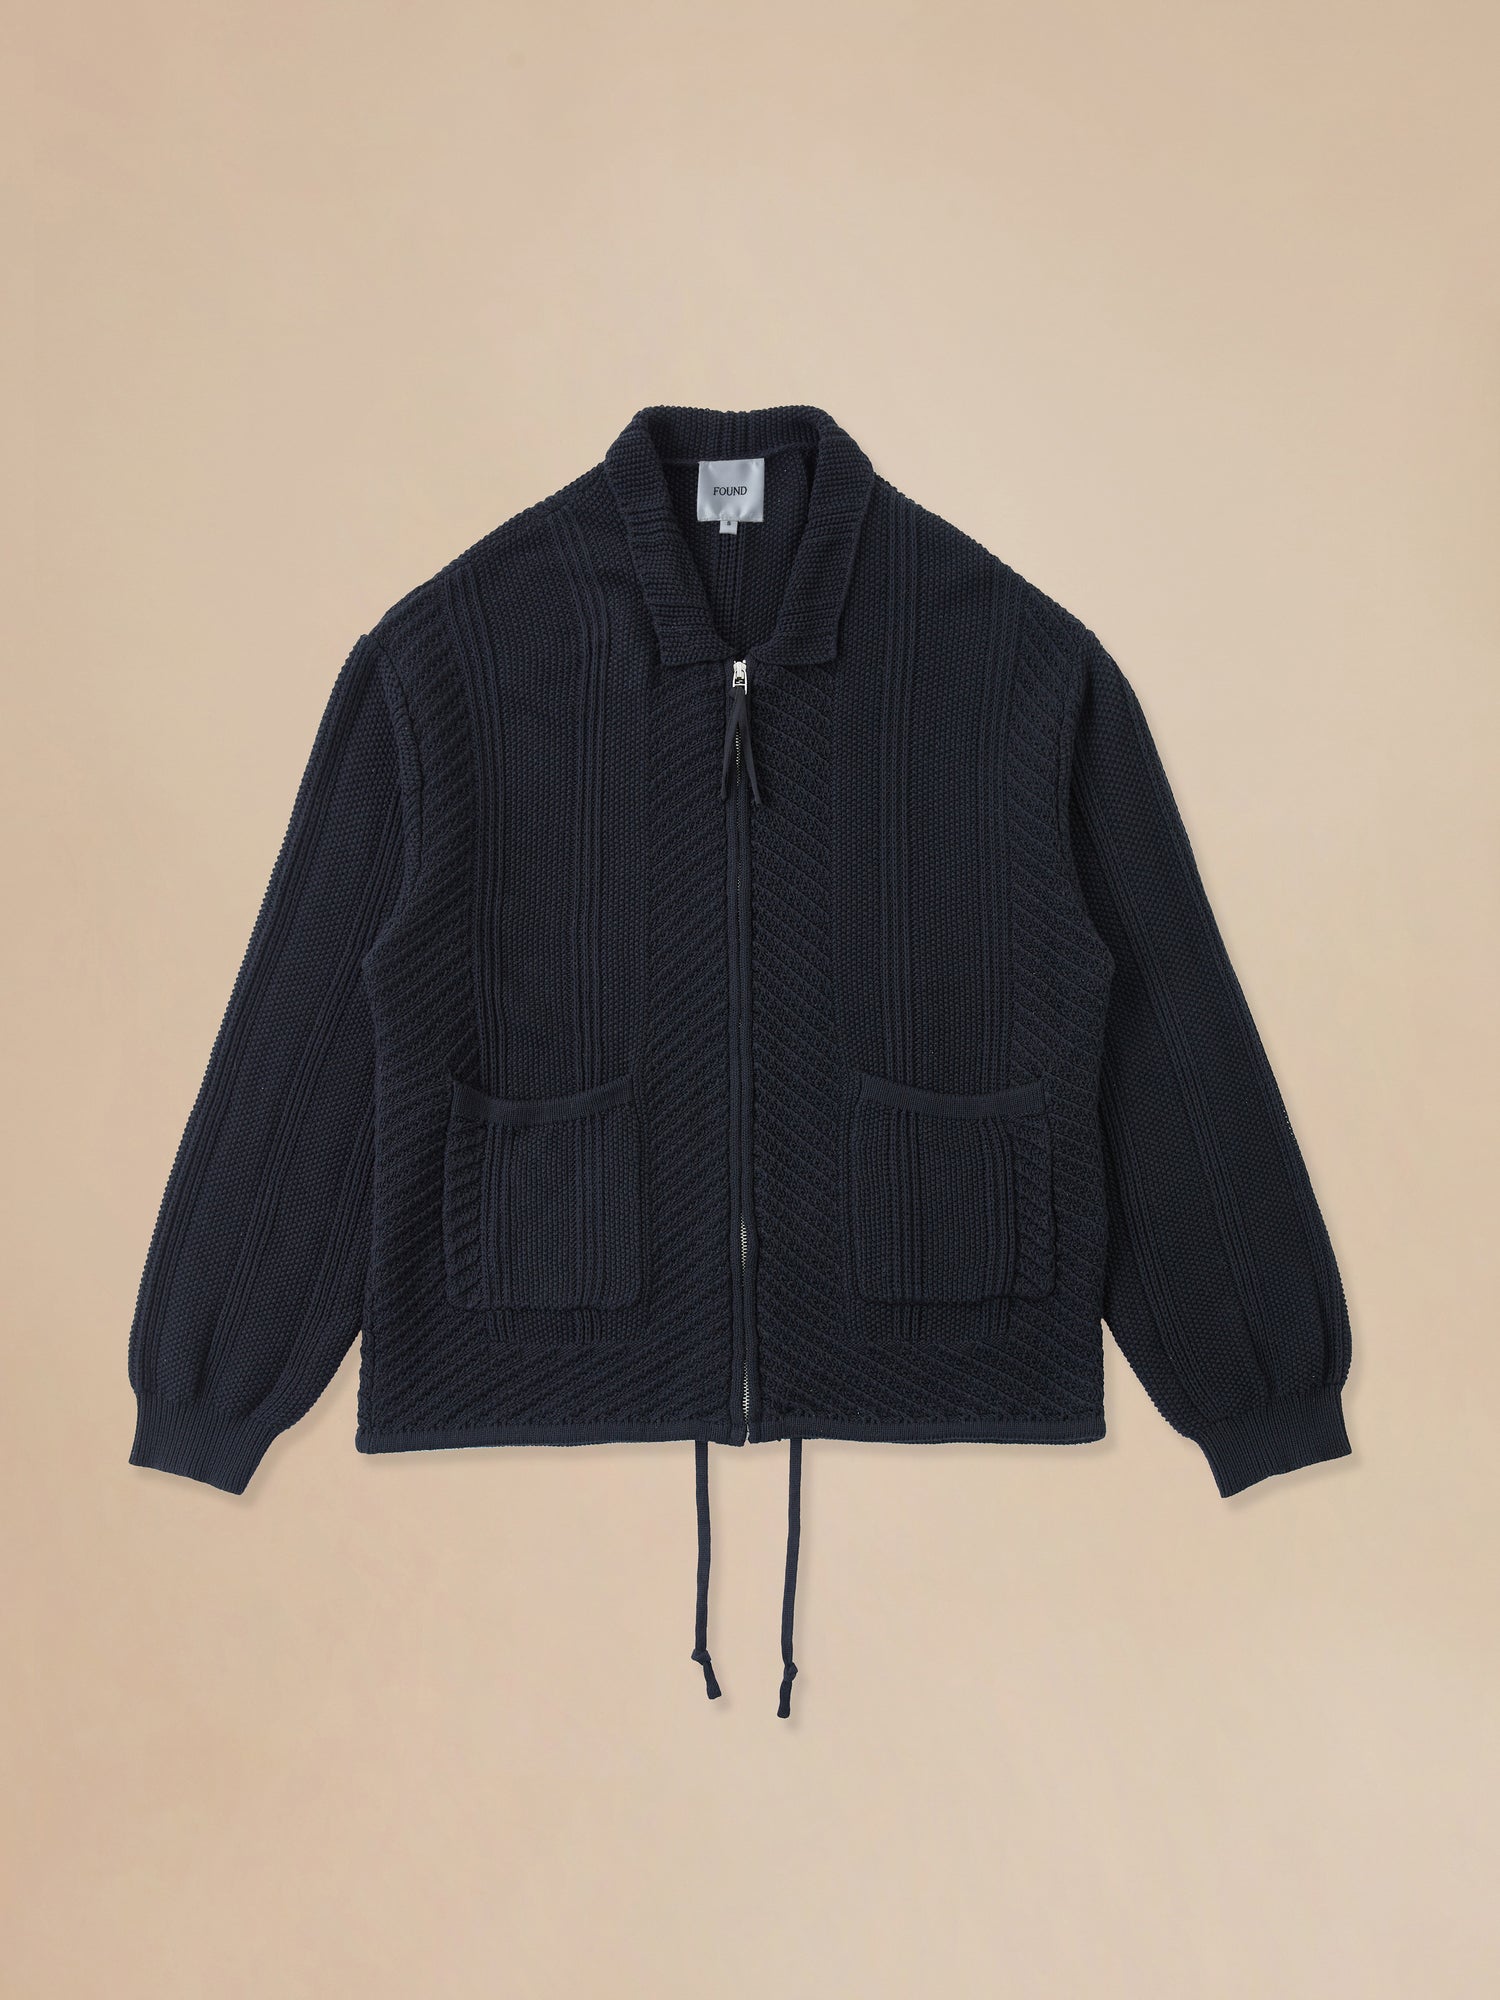 A Found black Zip Up Panel Knit Ribbed Sweater with cable-knit detailing.